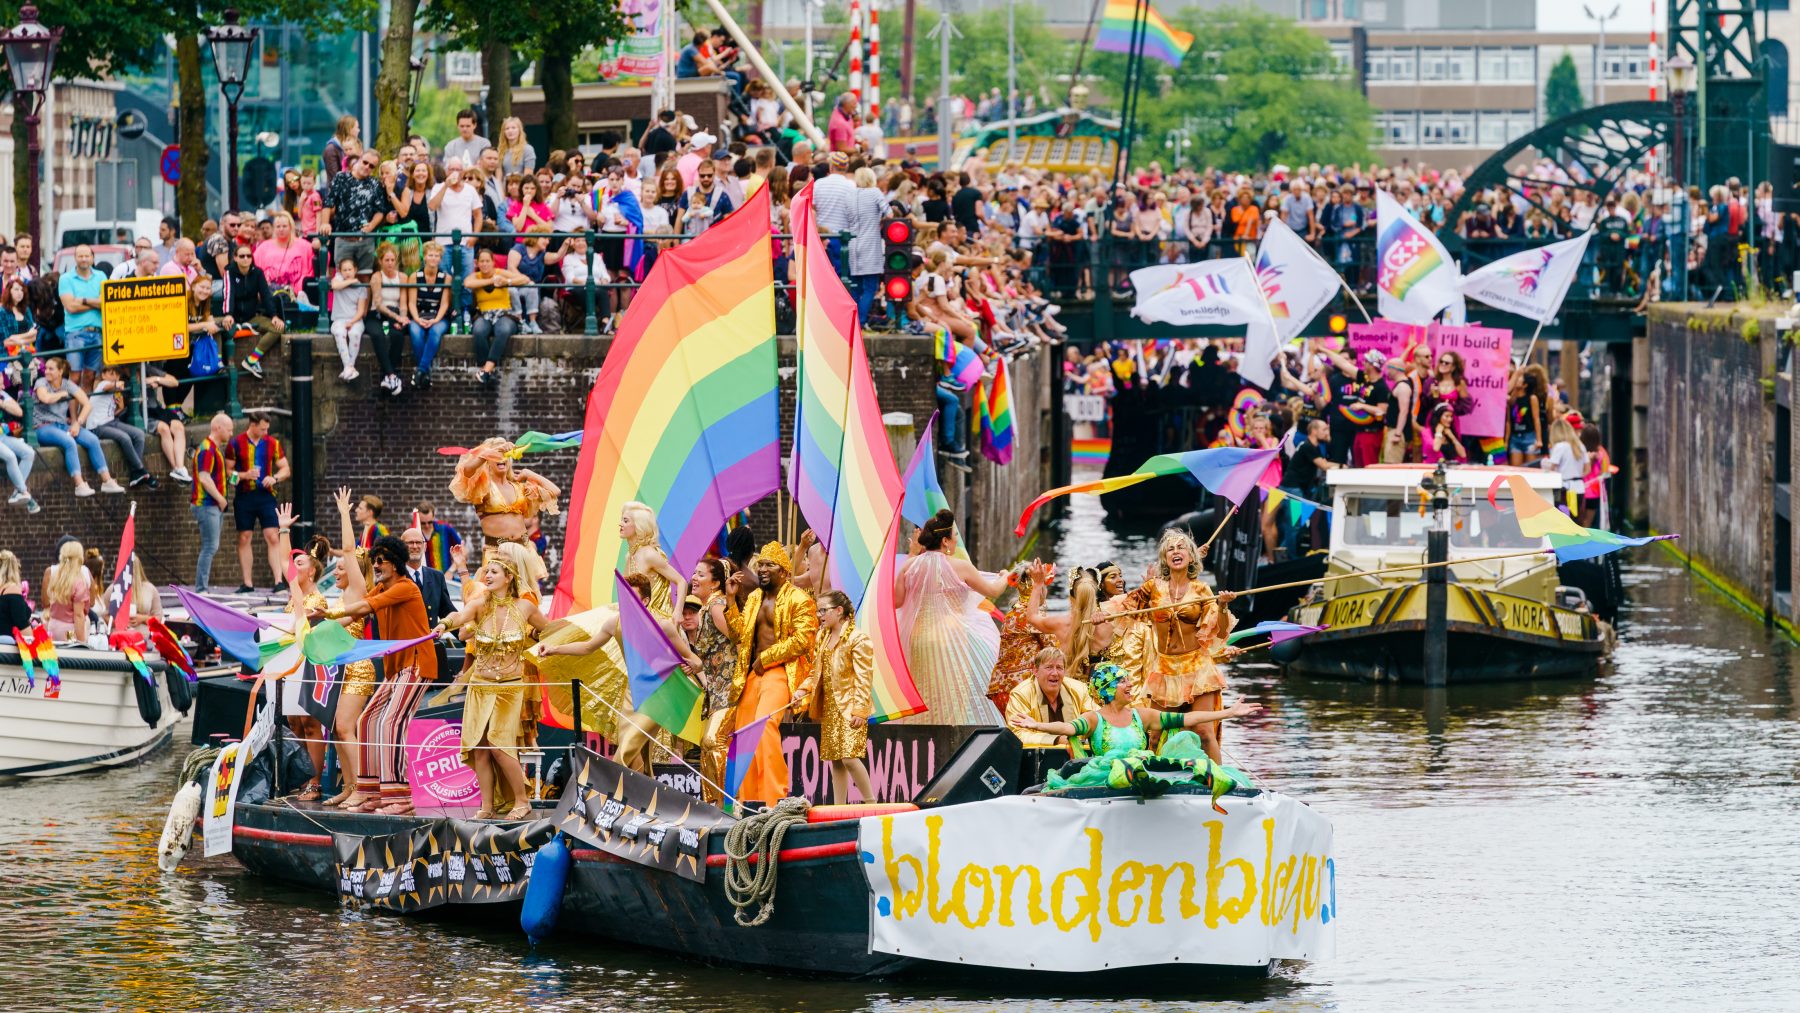 10 x dít is 'Canal Parade' 2019 in Amsterdam in beeld LINDA.nl